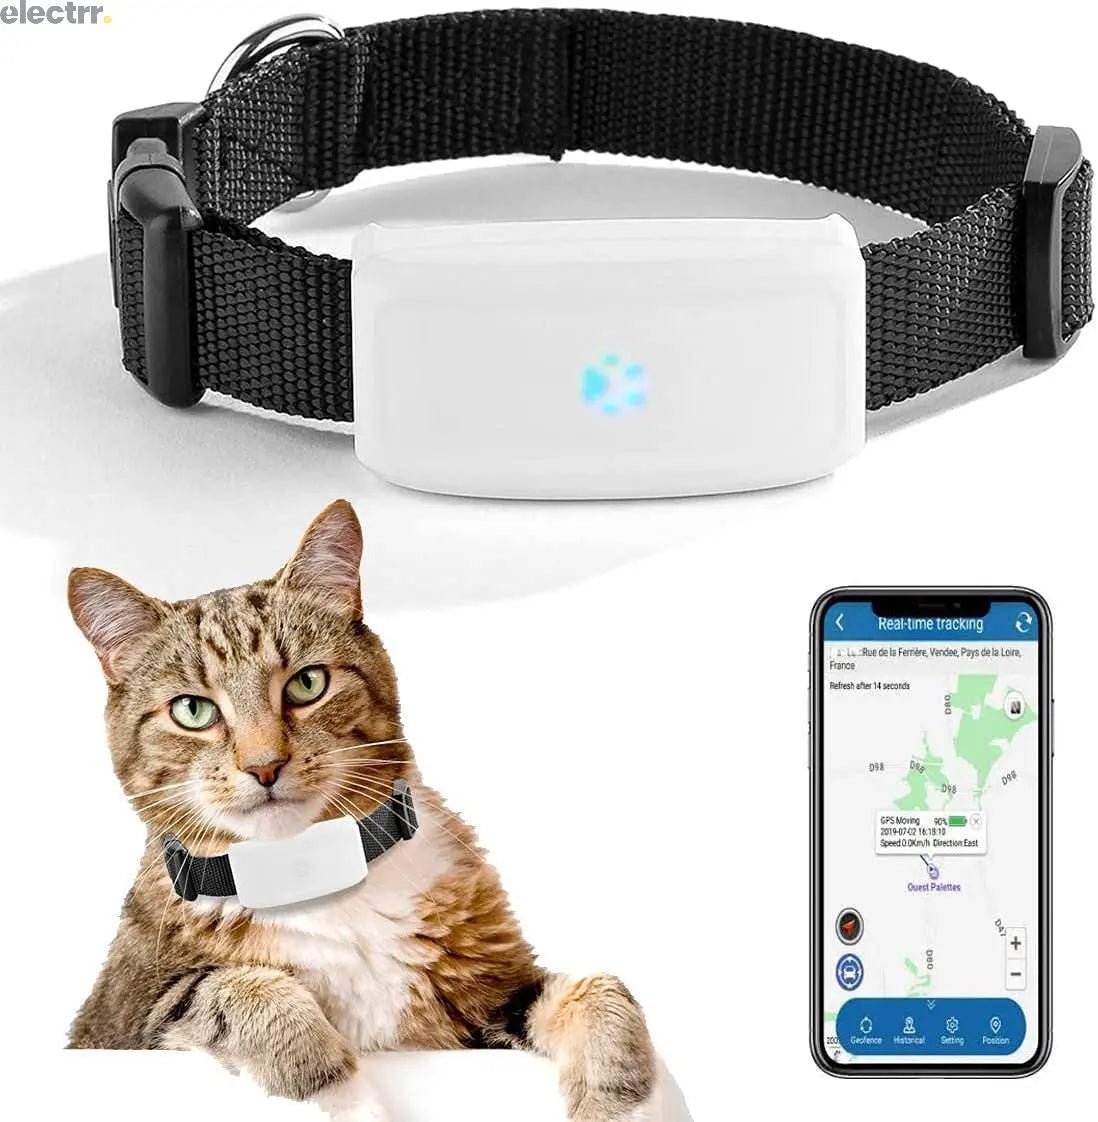 Pet GPS Tracker Dog GPS Tracker and Pet Finder Waterproof Activity Monitor Tracking Device for Dogs Cats Pets Kids Elders | Electrr Inc